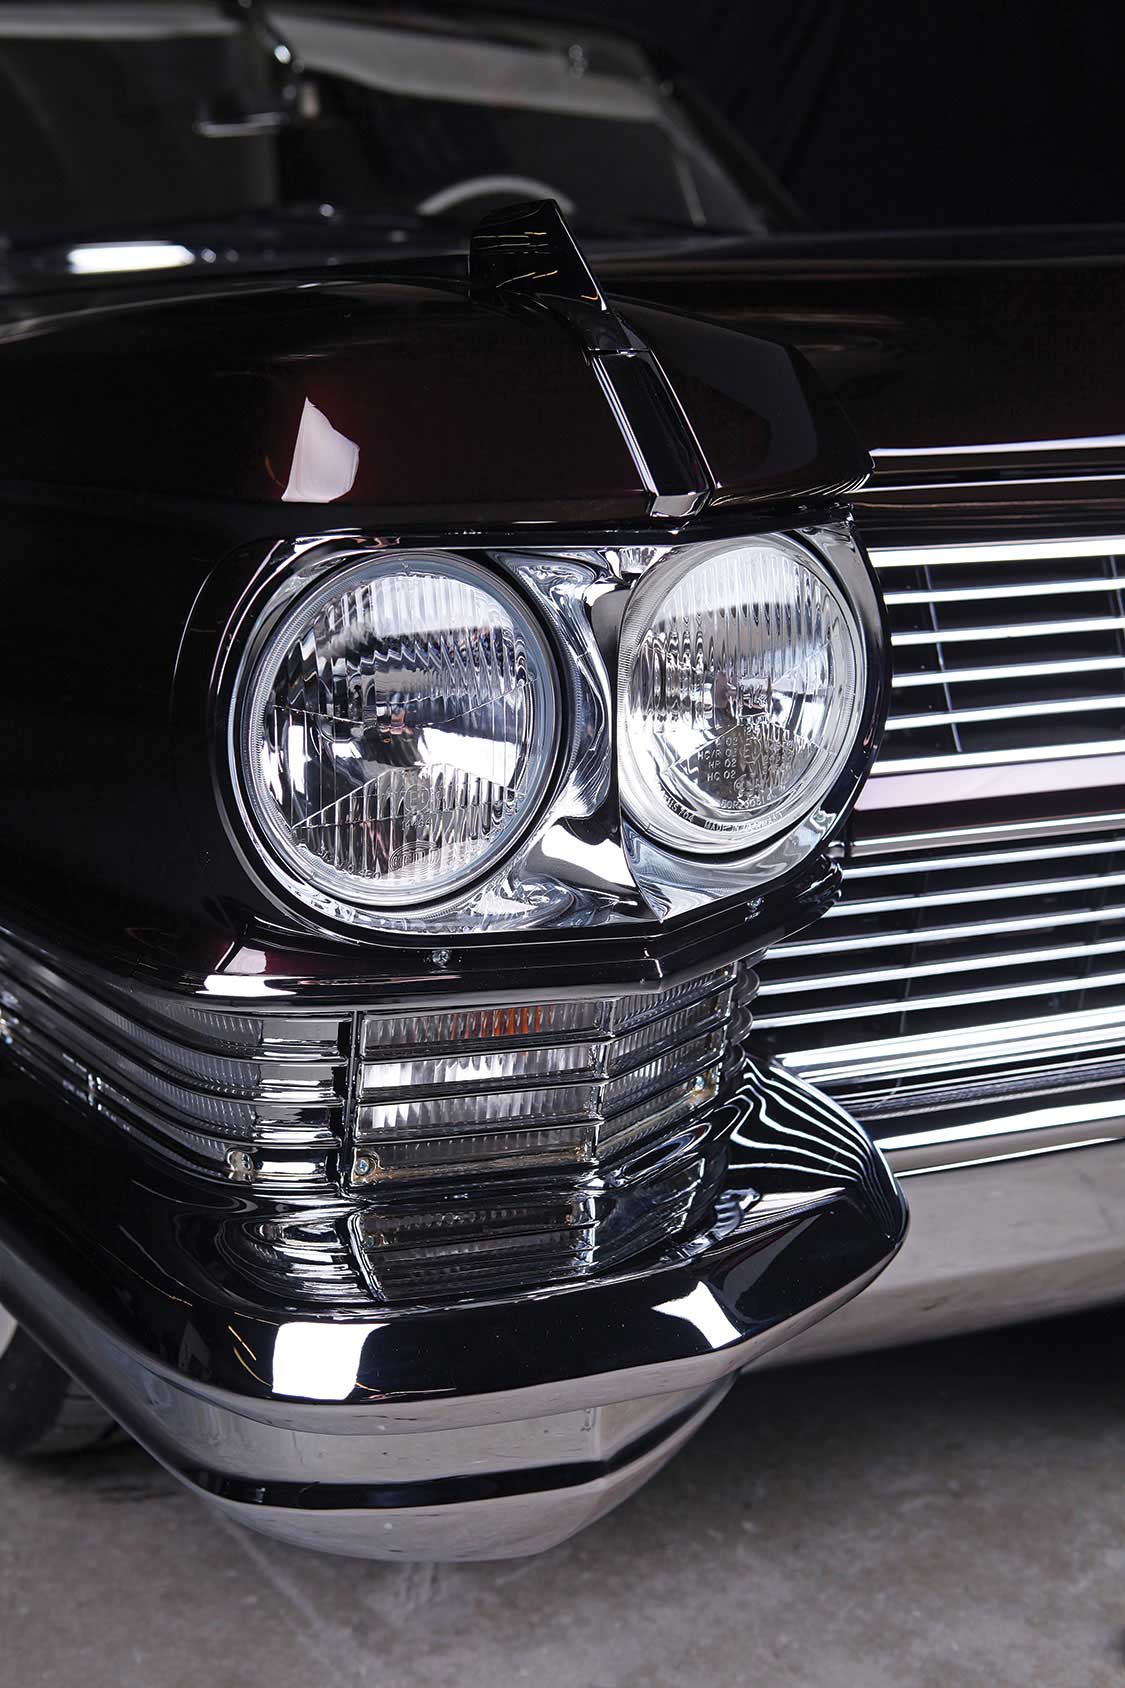 OEM headlights on a Cadillac Coupe DeVille